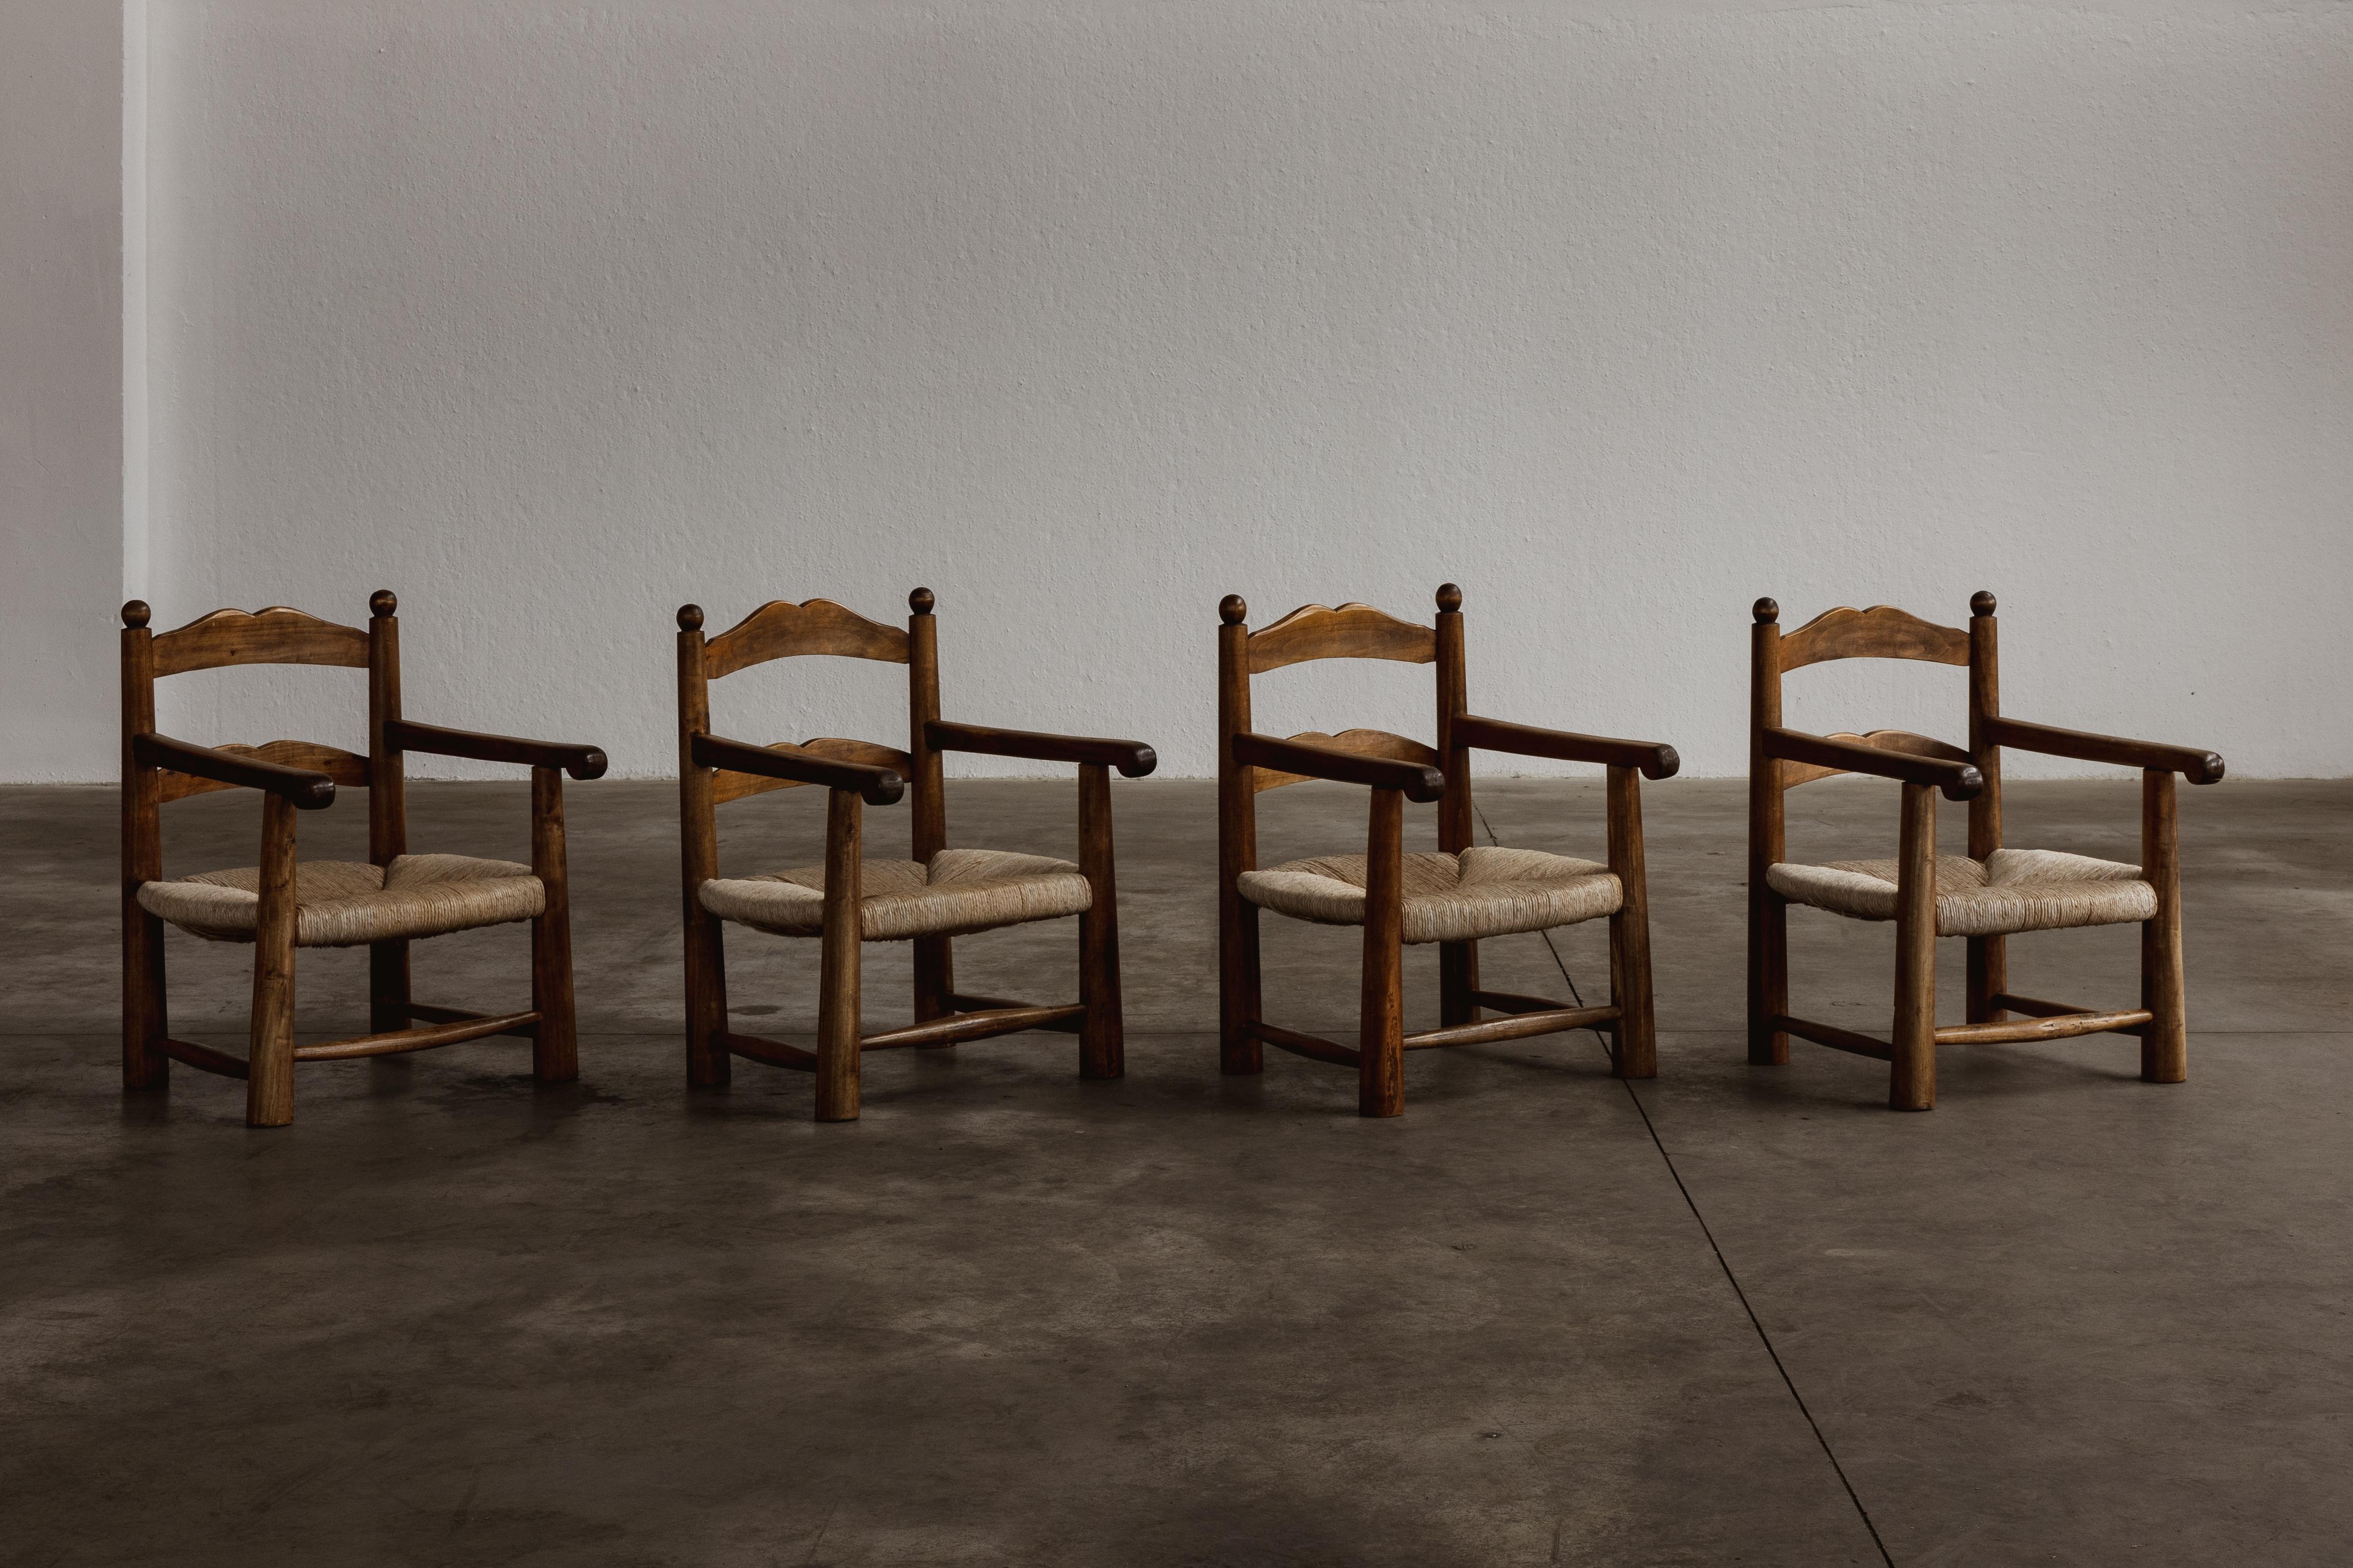 Charles Dudouyt easy chairs, straw and wood, France, 1940s, set of four.

Recalling the turned chair model, Charles Dudouyt created these carved chairs as 'fireside' chairs, hence the low seats. Using playful geometries and construction, he crafted